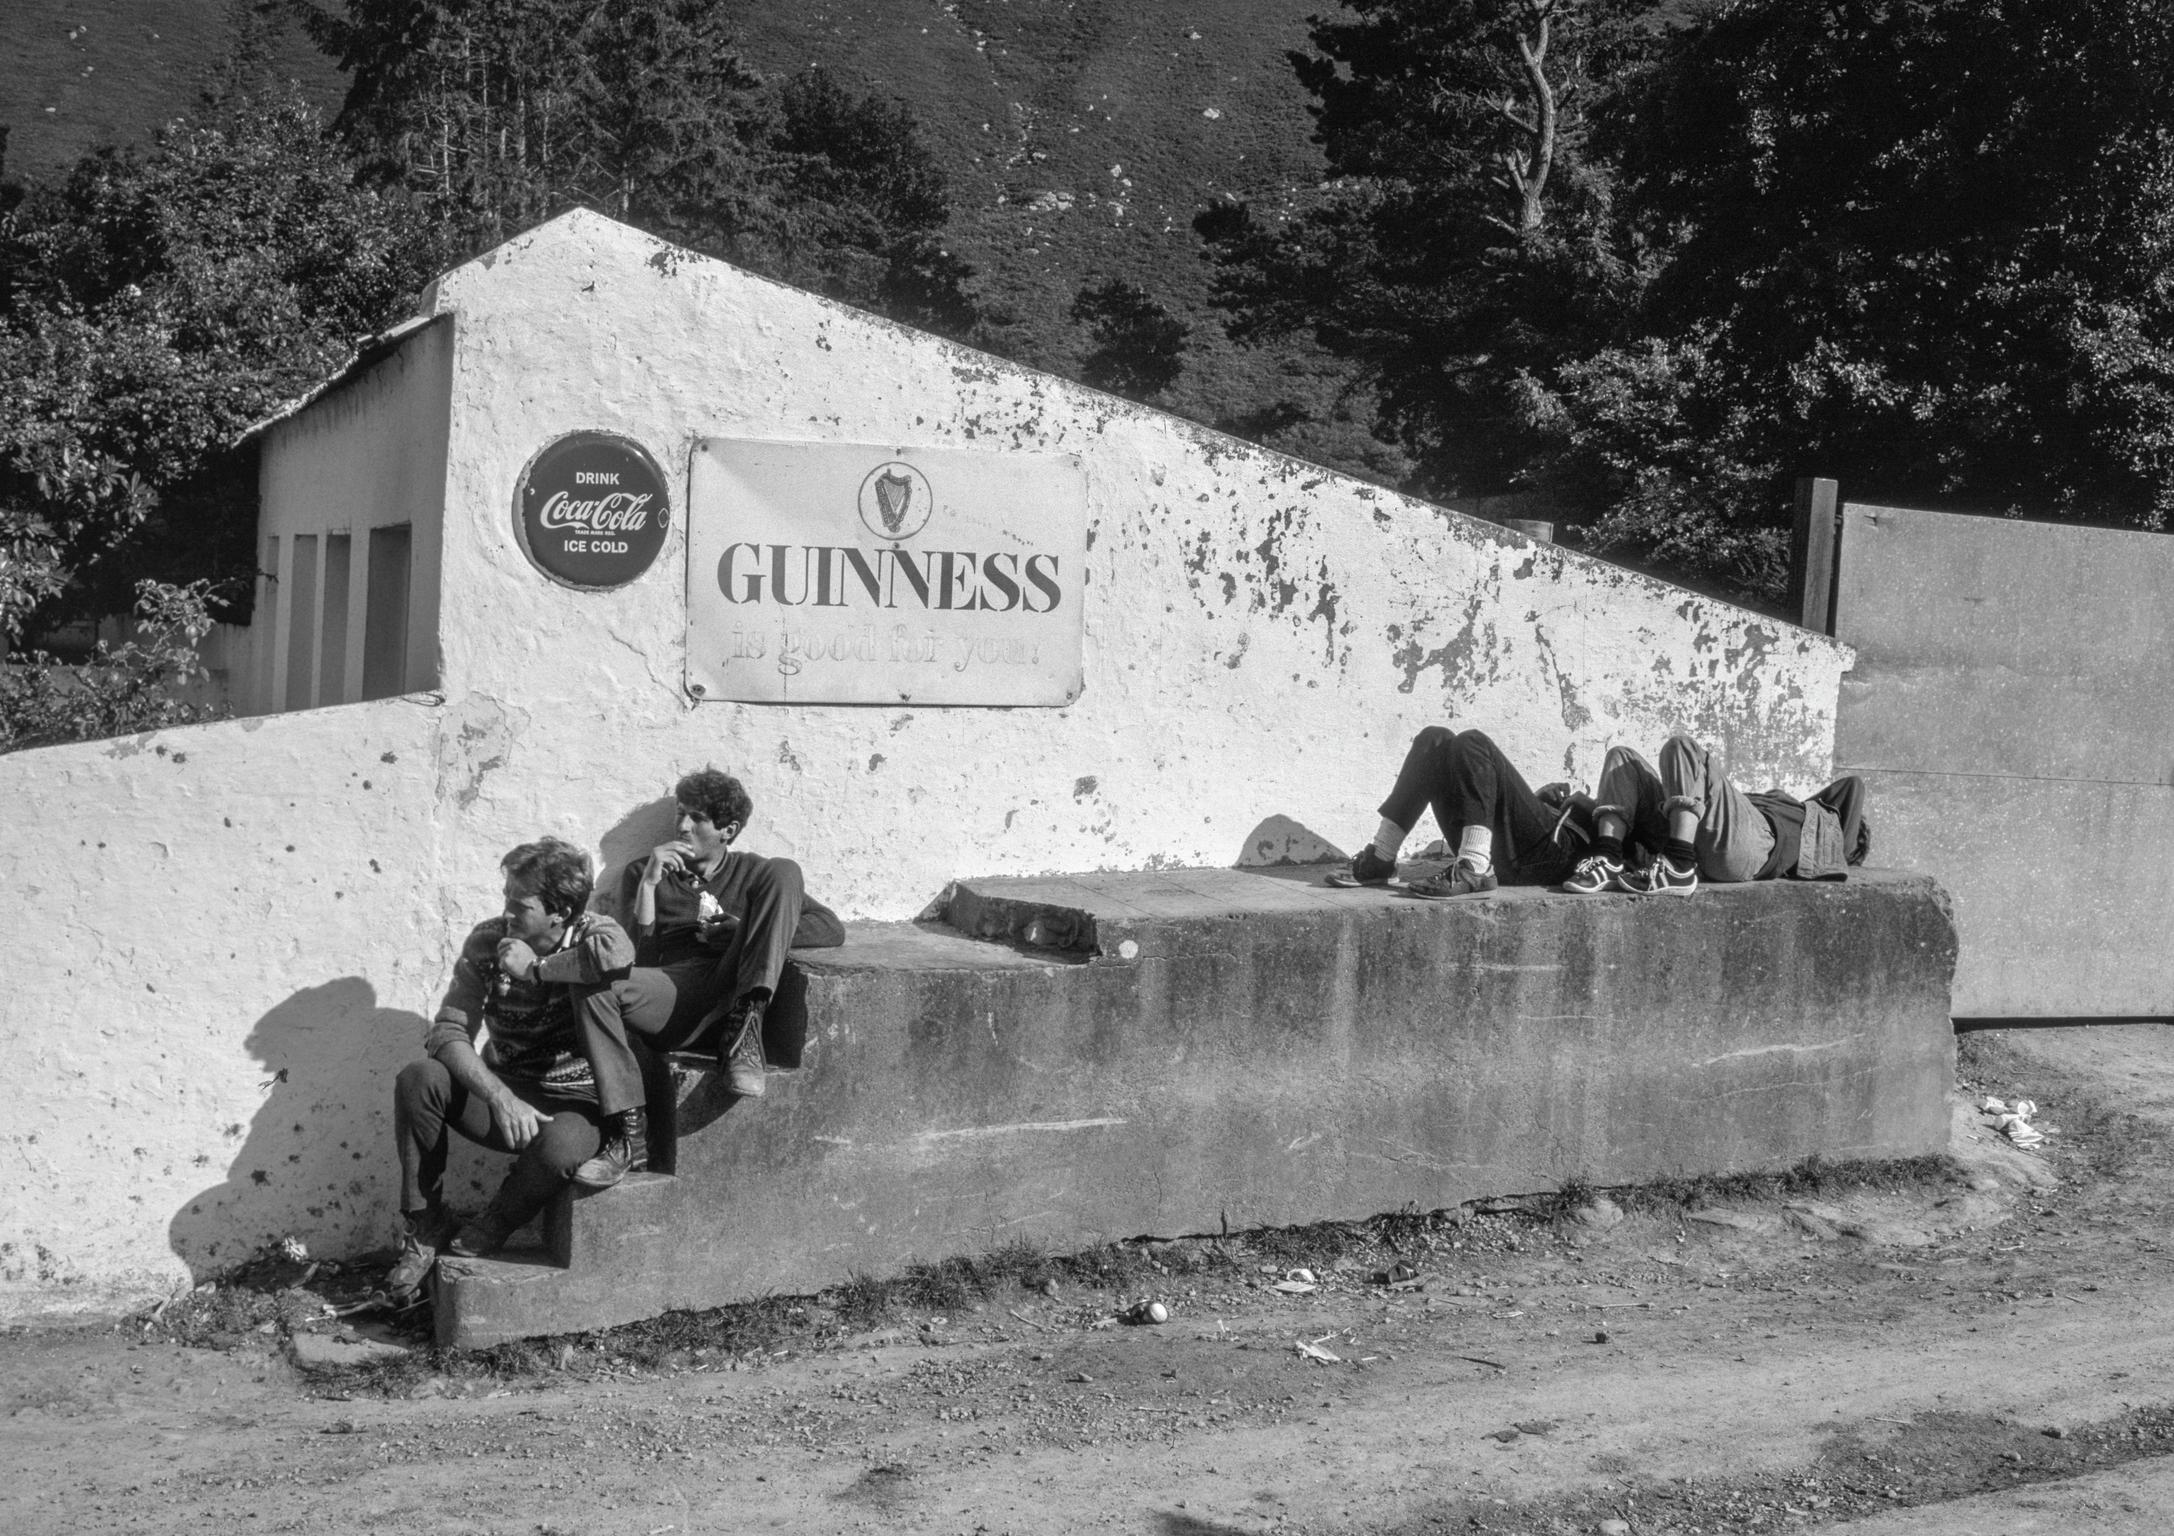 The Irish have the ability to relax in a most elegant way. You often see them, as here in Kerry, sitting by the roadside for no apparent reason. Kerry. Ireland